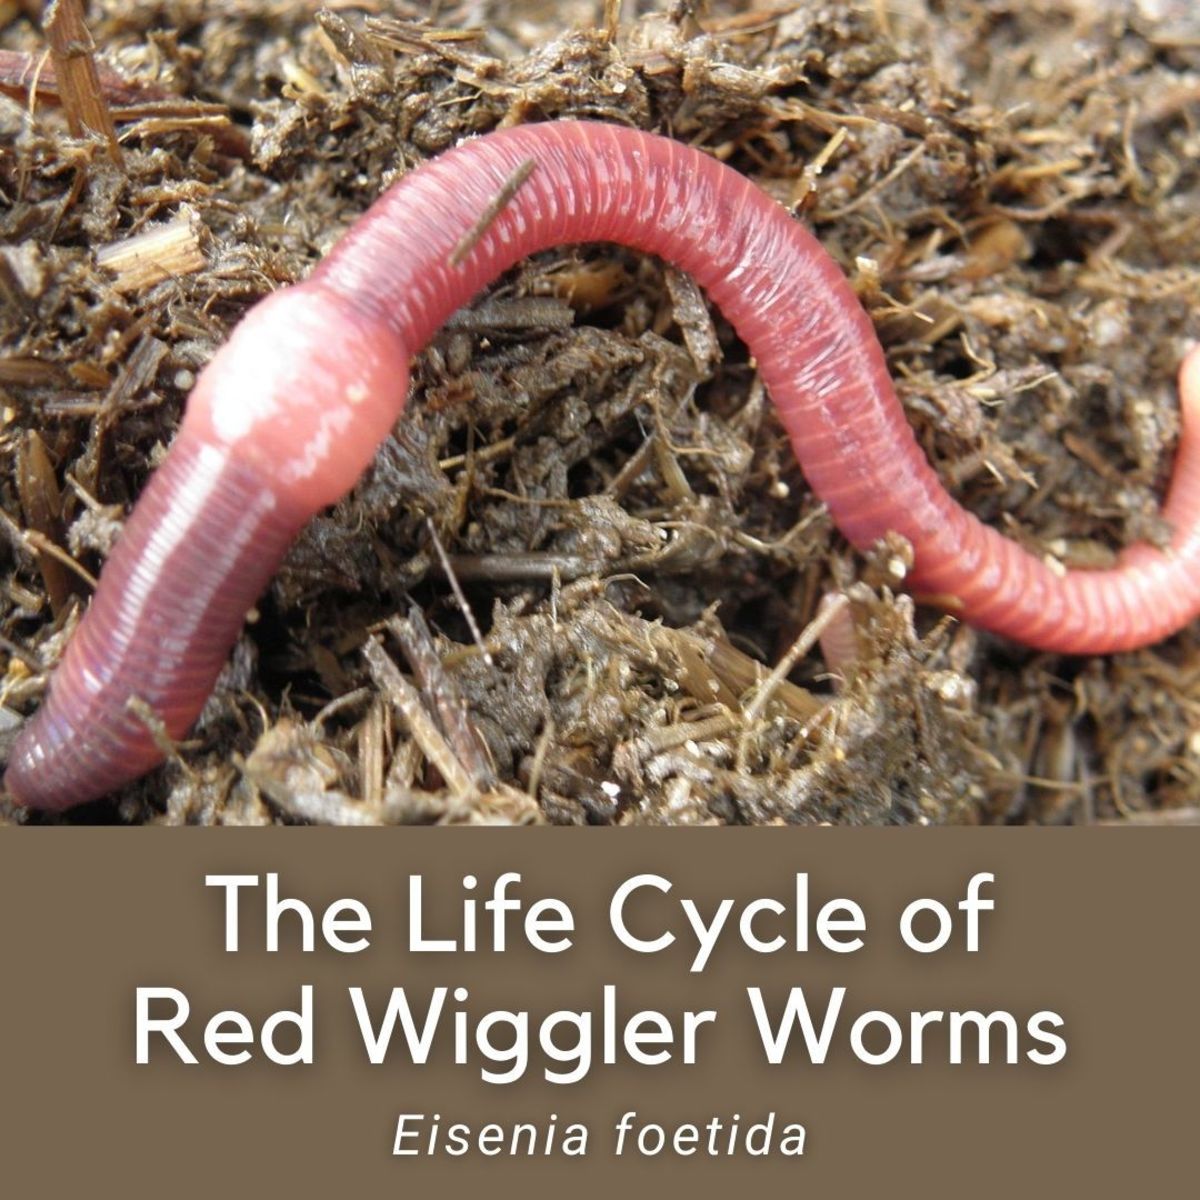 We all know that Red Wiggler worms (Eisenia foetida) are amongst the most popular worm species in worm composting and organic gardening.